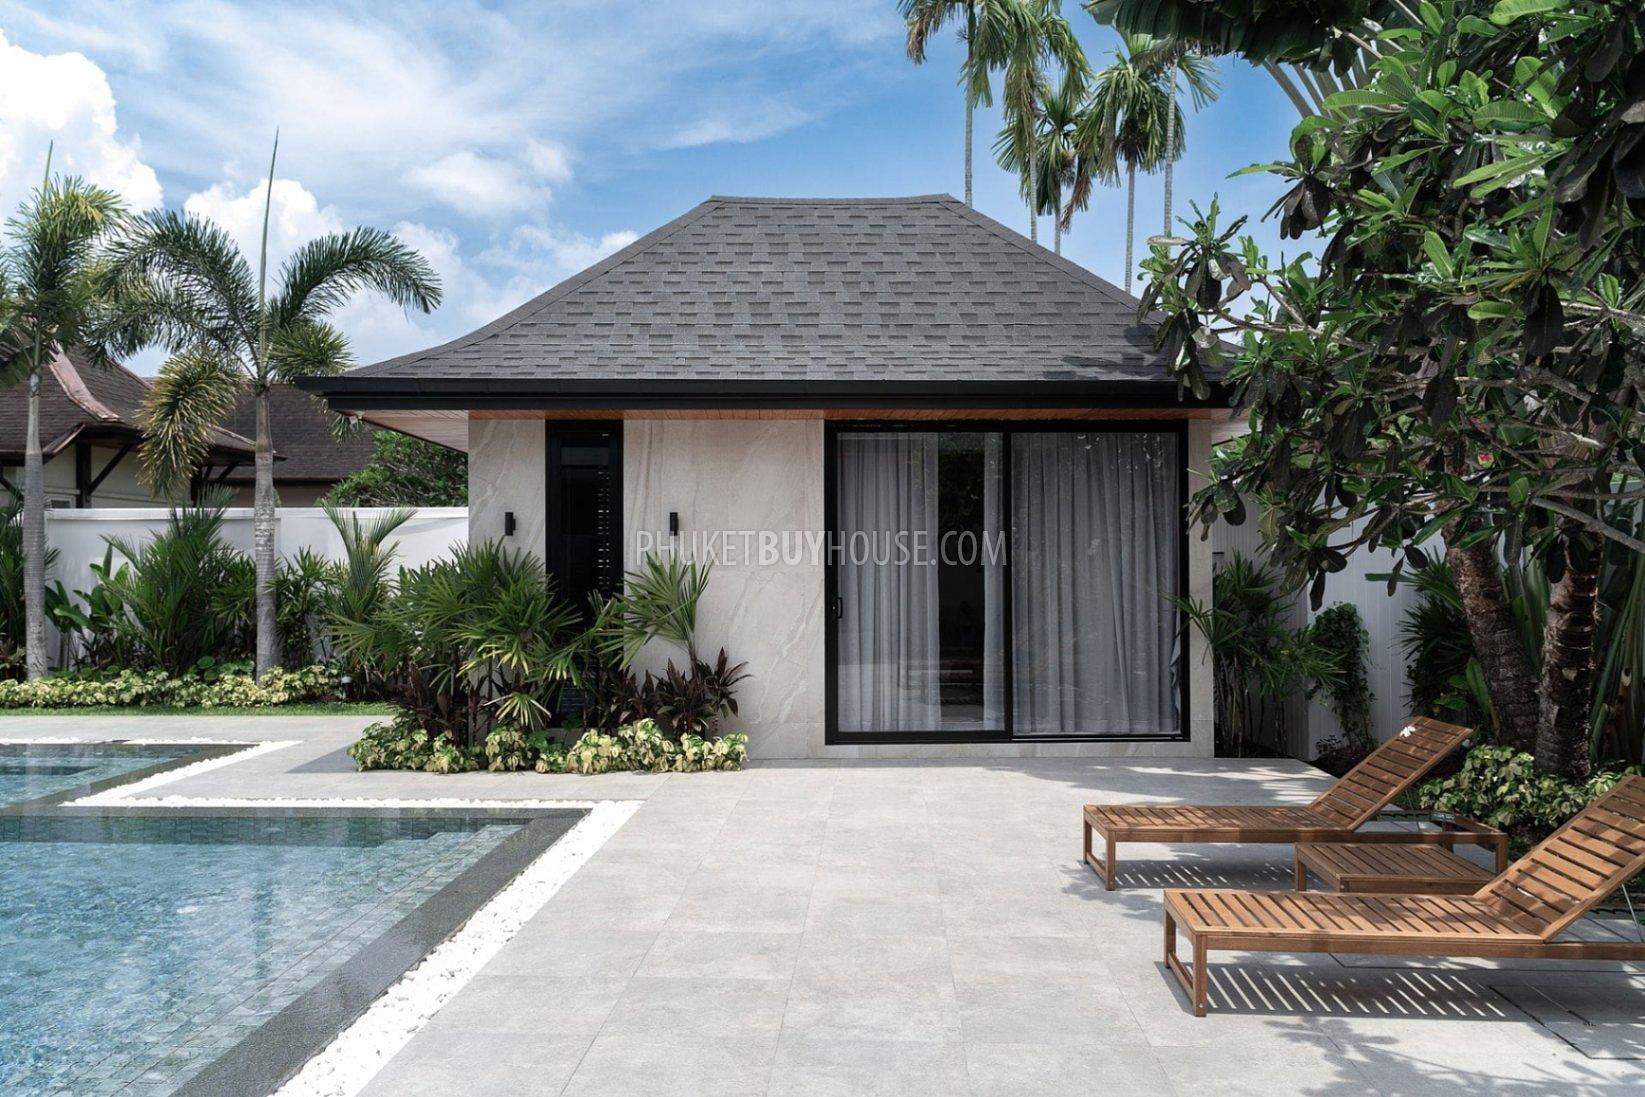 CHE22088: Wood and Marble: Elegant and Laconic Minimalist Style 4-Bedroom Villa in Choeng Thale. Photo #13